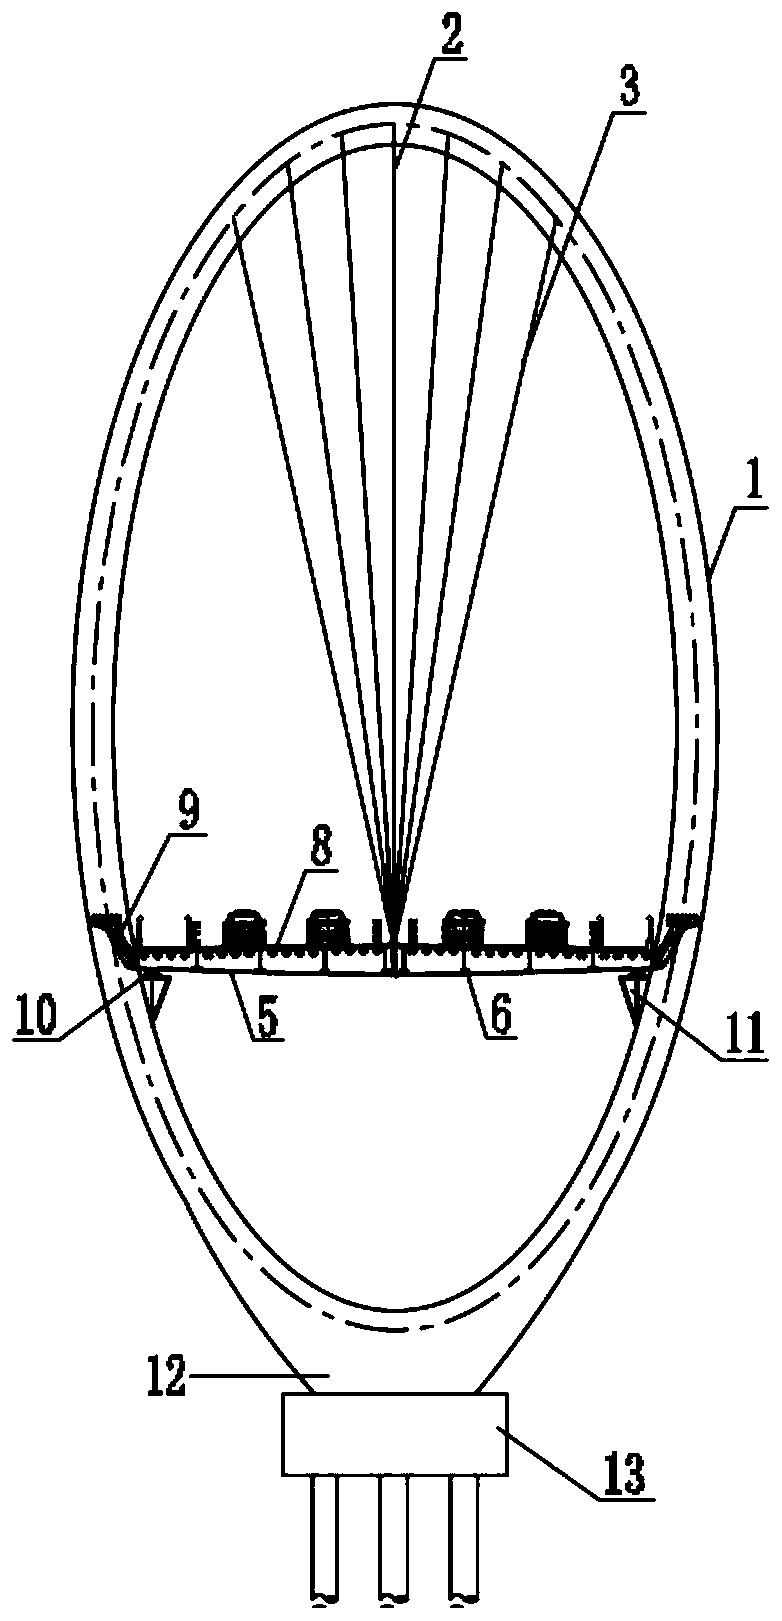 A composite bridge structure system with single helical arch and suspension cables